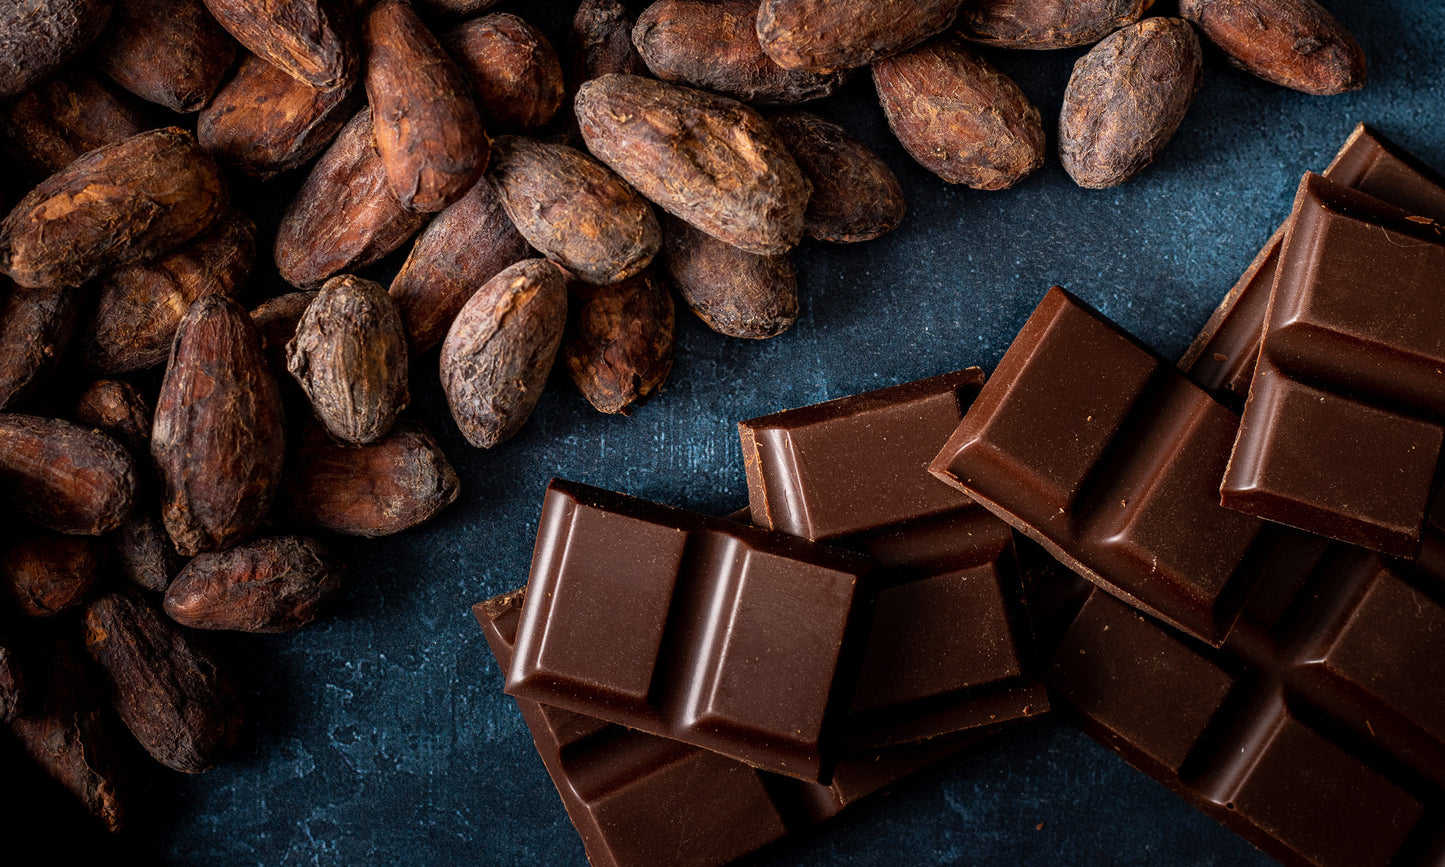 Embrace Chocolate - Cacao beans and chocolate squares